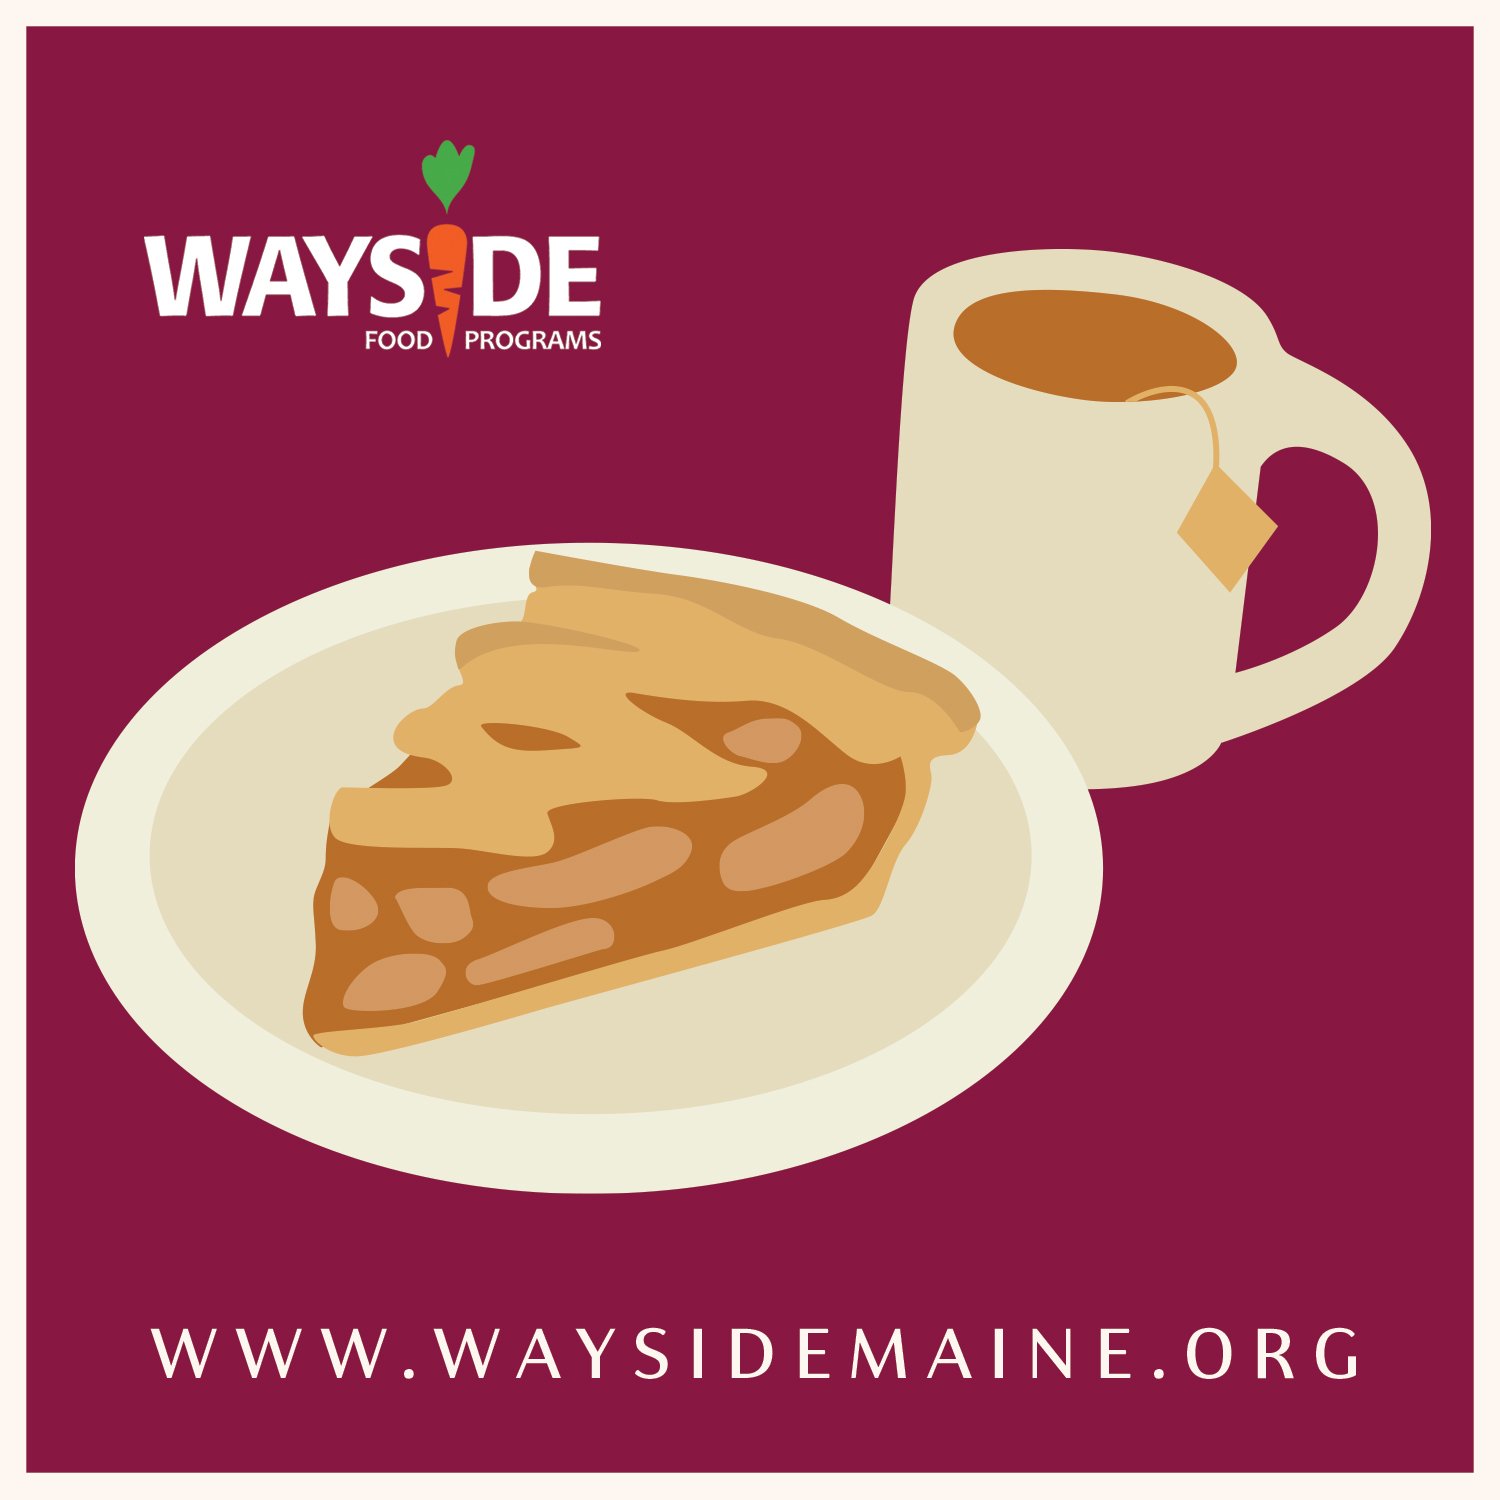 We are excited to announce our new website is LIVE! Please head over to www.waysidemaine.org to check it out!
.
.
#newwebsite #FoodRescue #communitymeal #mobilefoodpantry #governmentfoodprogram #getinvolved #localresources #localfood #southernmaine